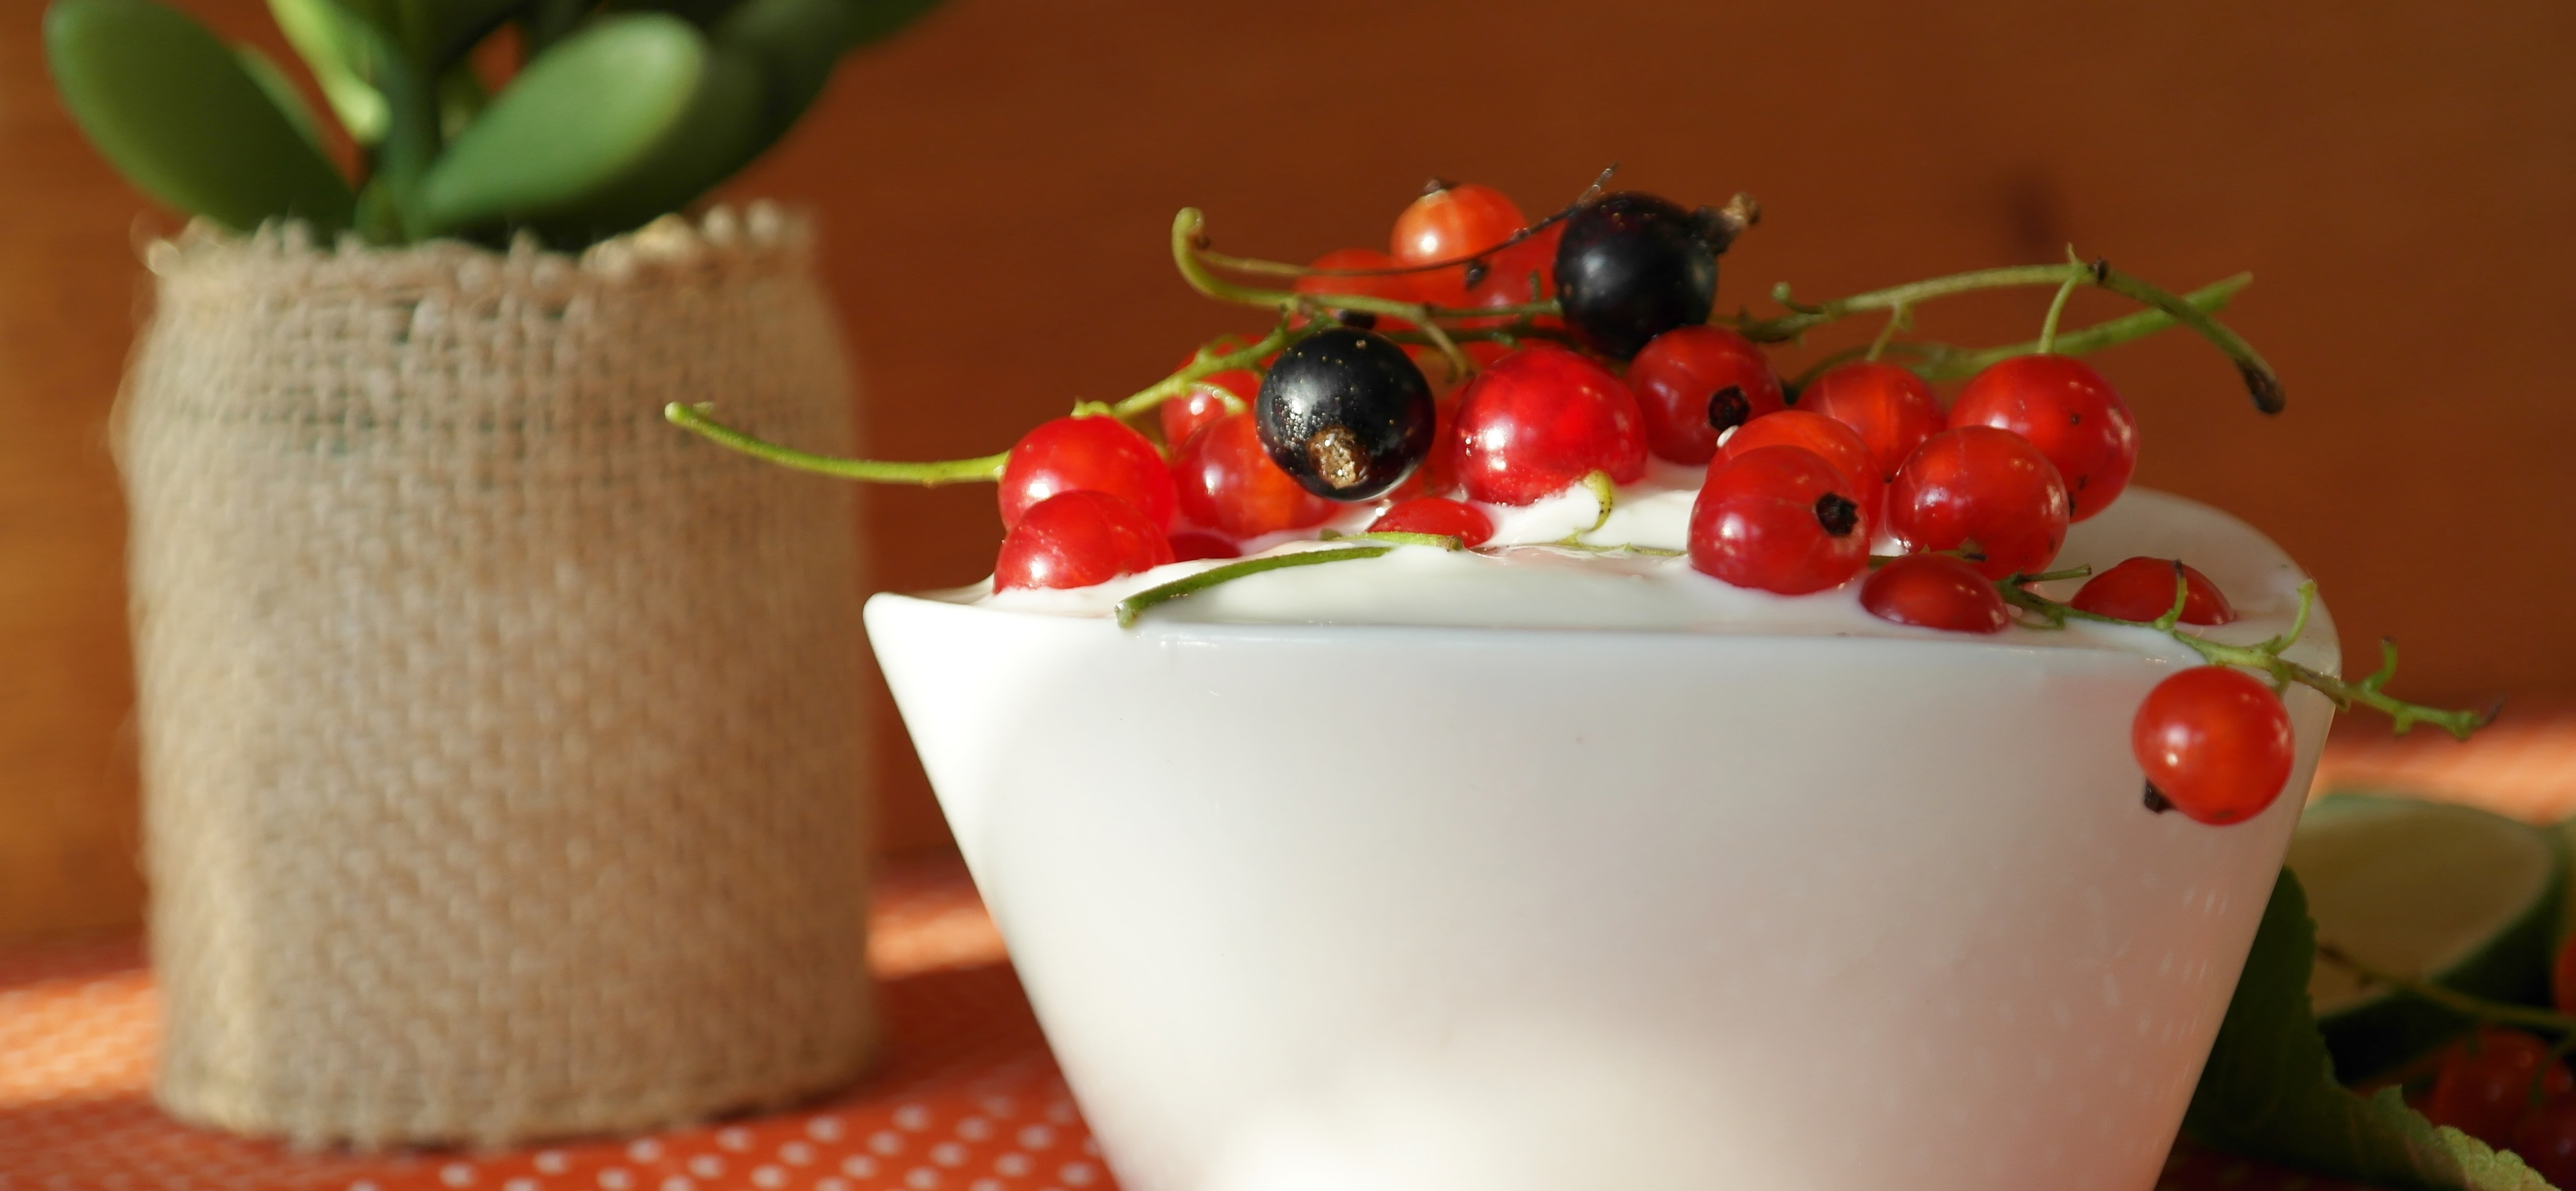 blue and red berries on white ceramic cup with content